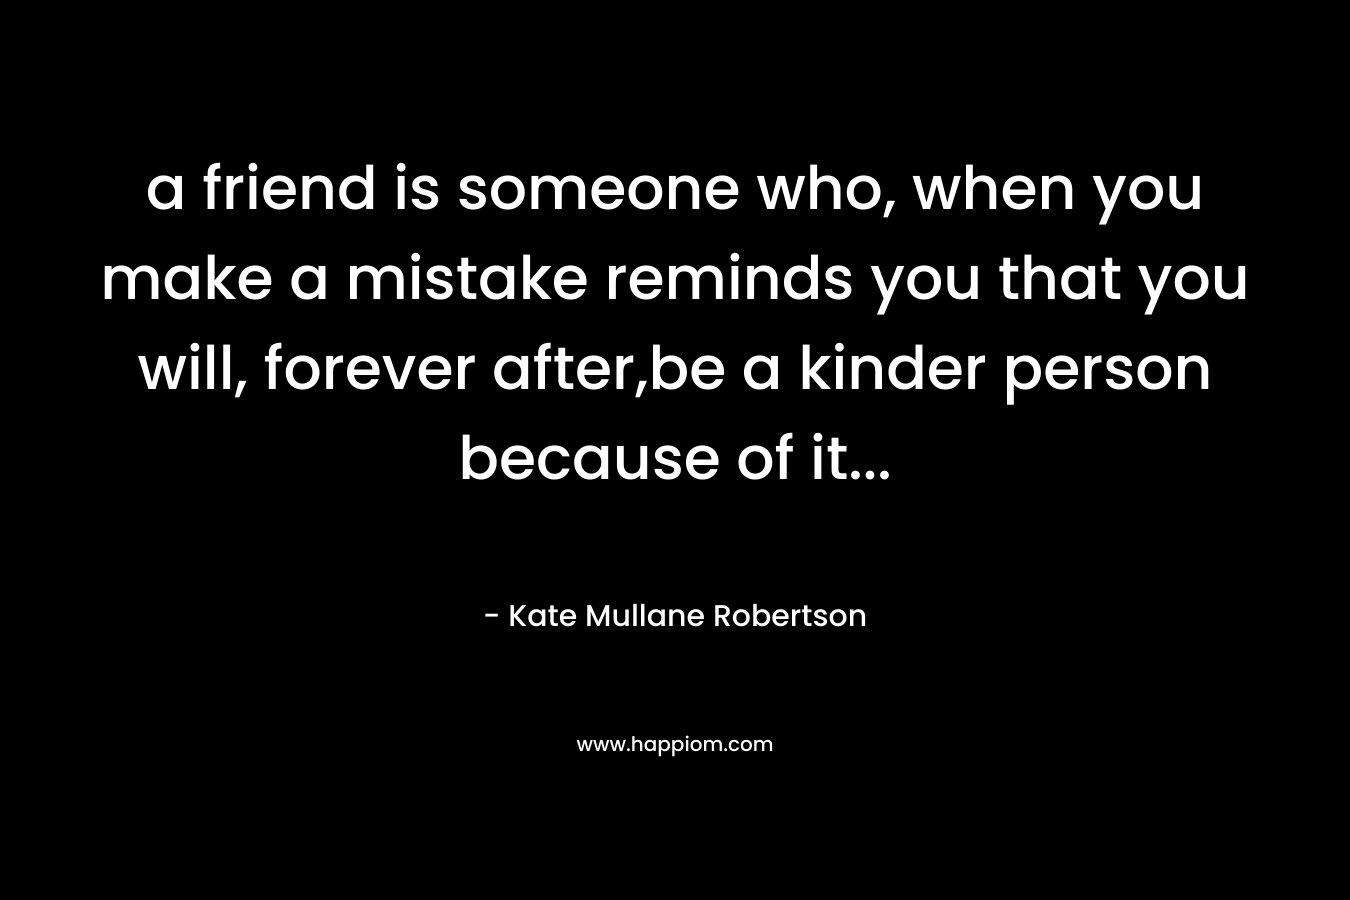 a friend is someone who, when you make a mistake reminds you that you will, forever after,be a kinder person because of it...